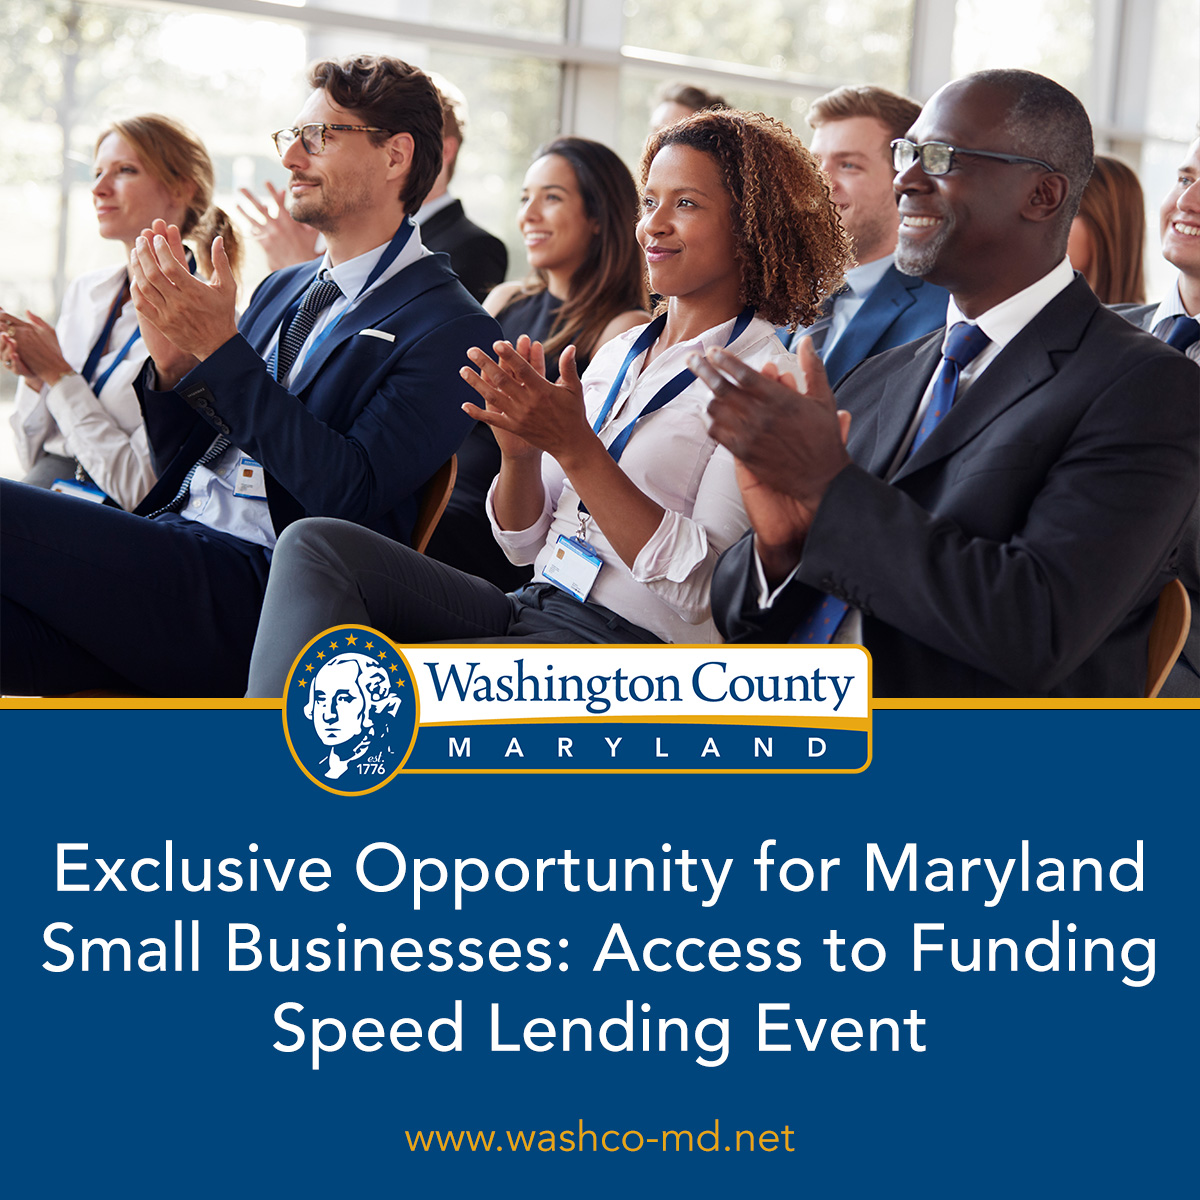 Speed Lending Extravaganza: Connect with Lenders and Boost Your Business Financing